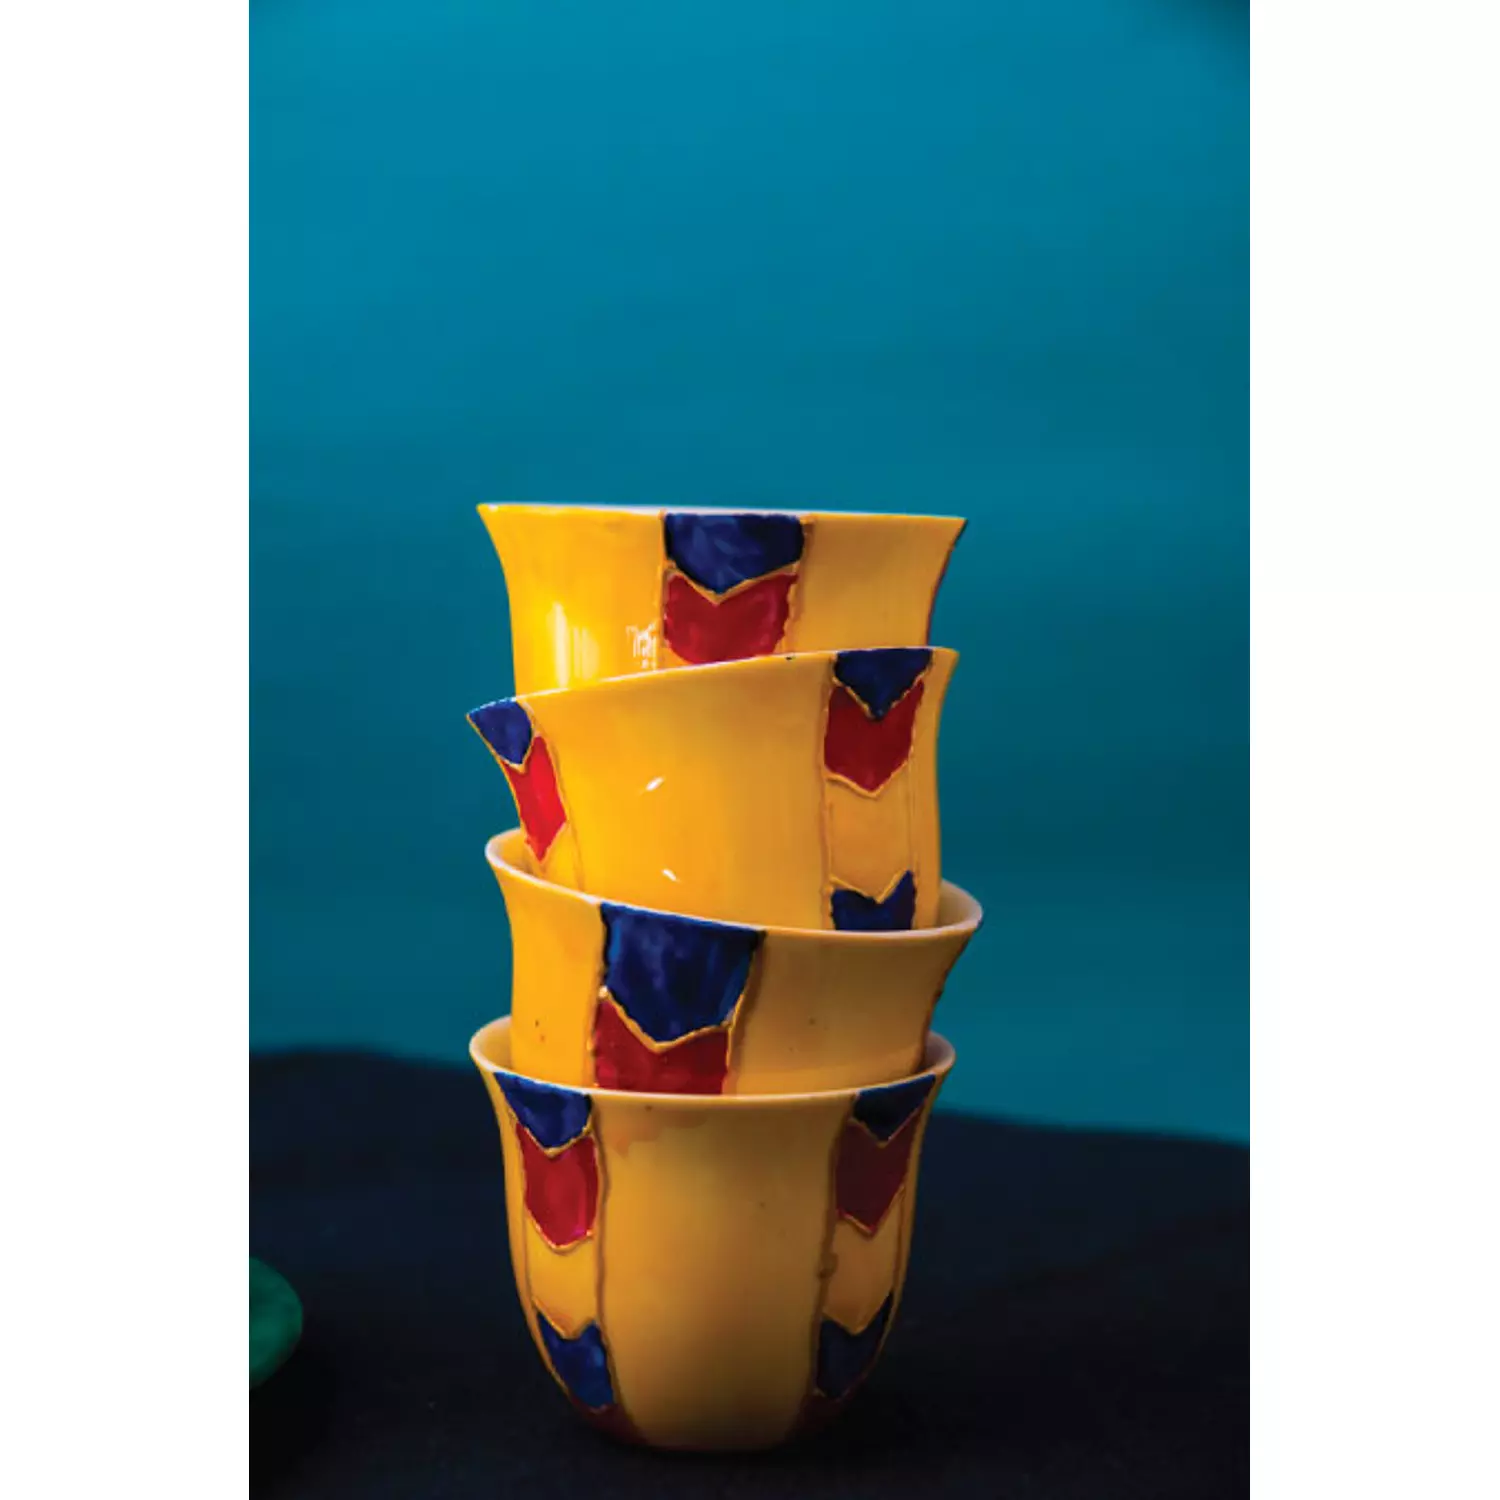 Canary Arabic Coffee Cups (6 pieces) hover image